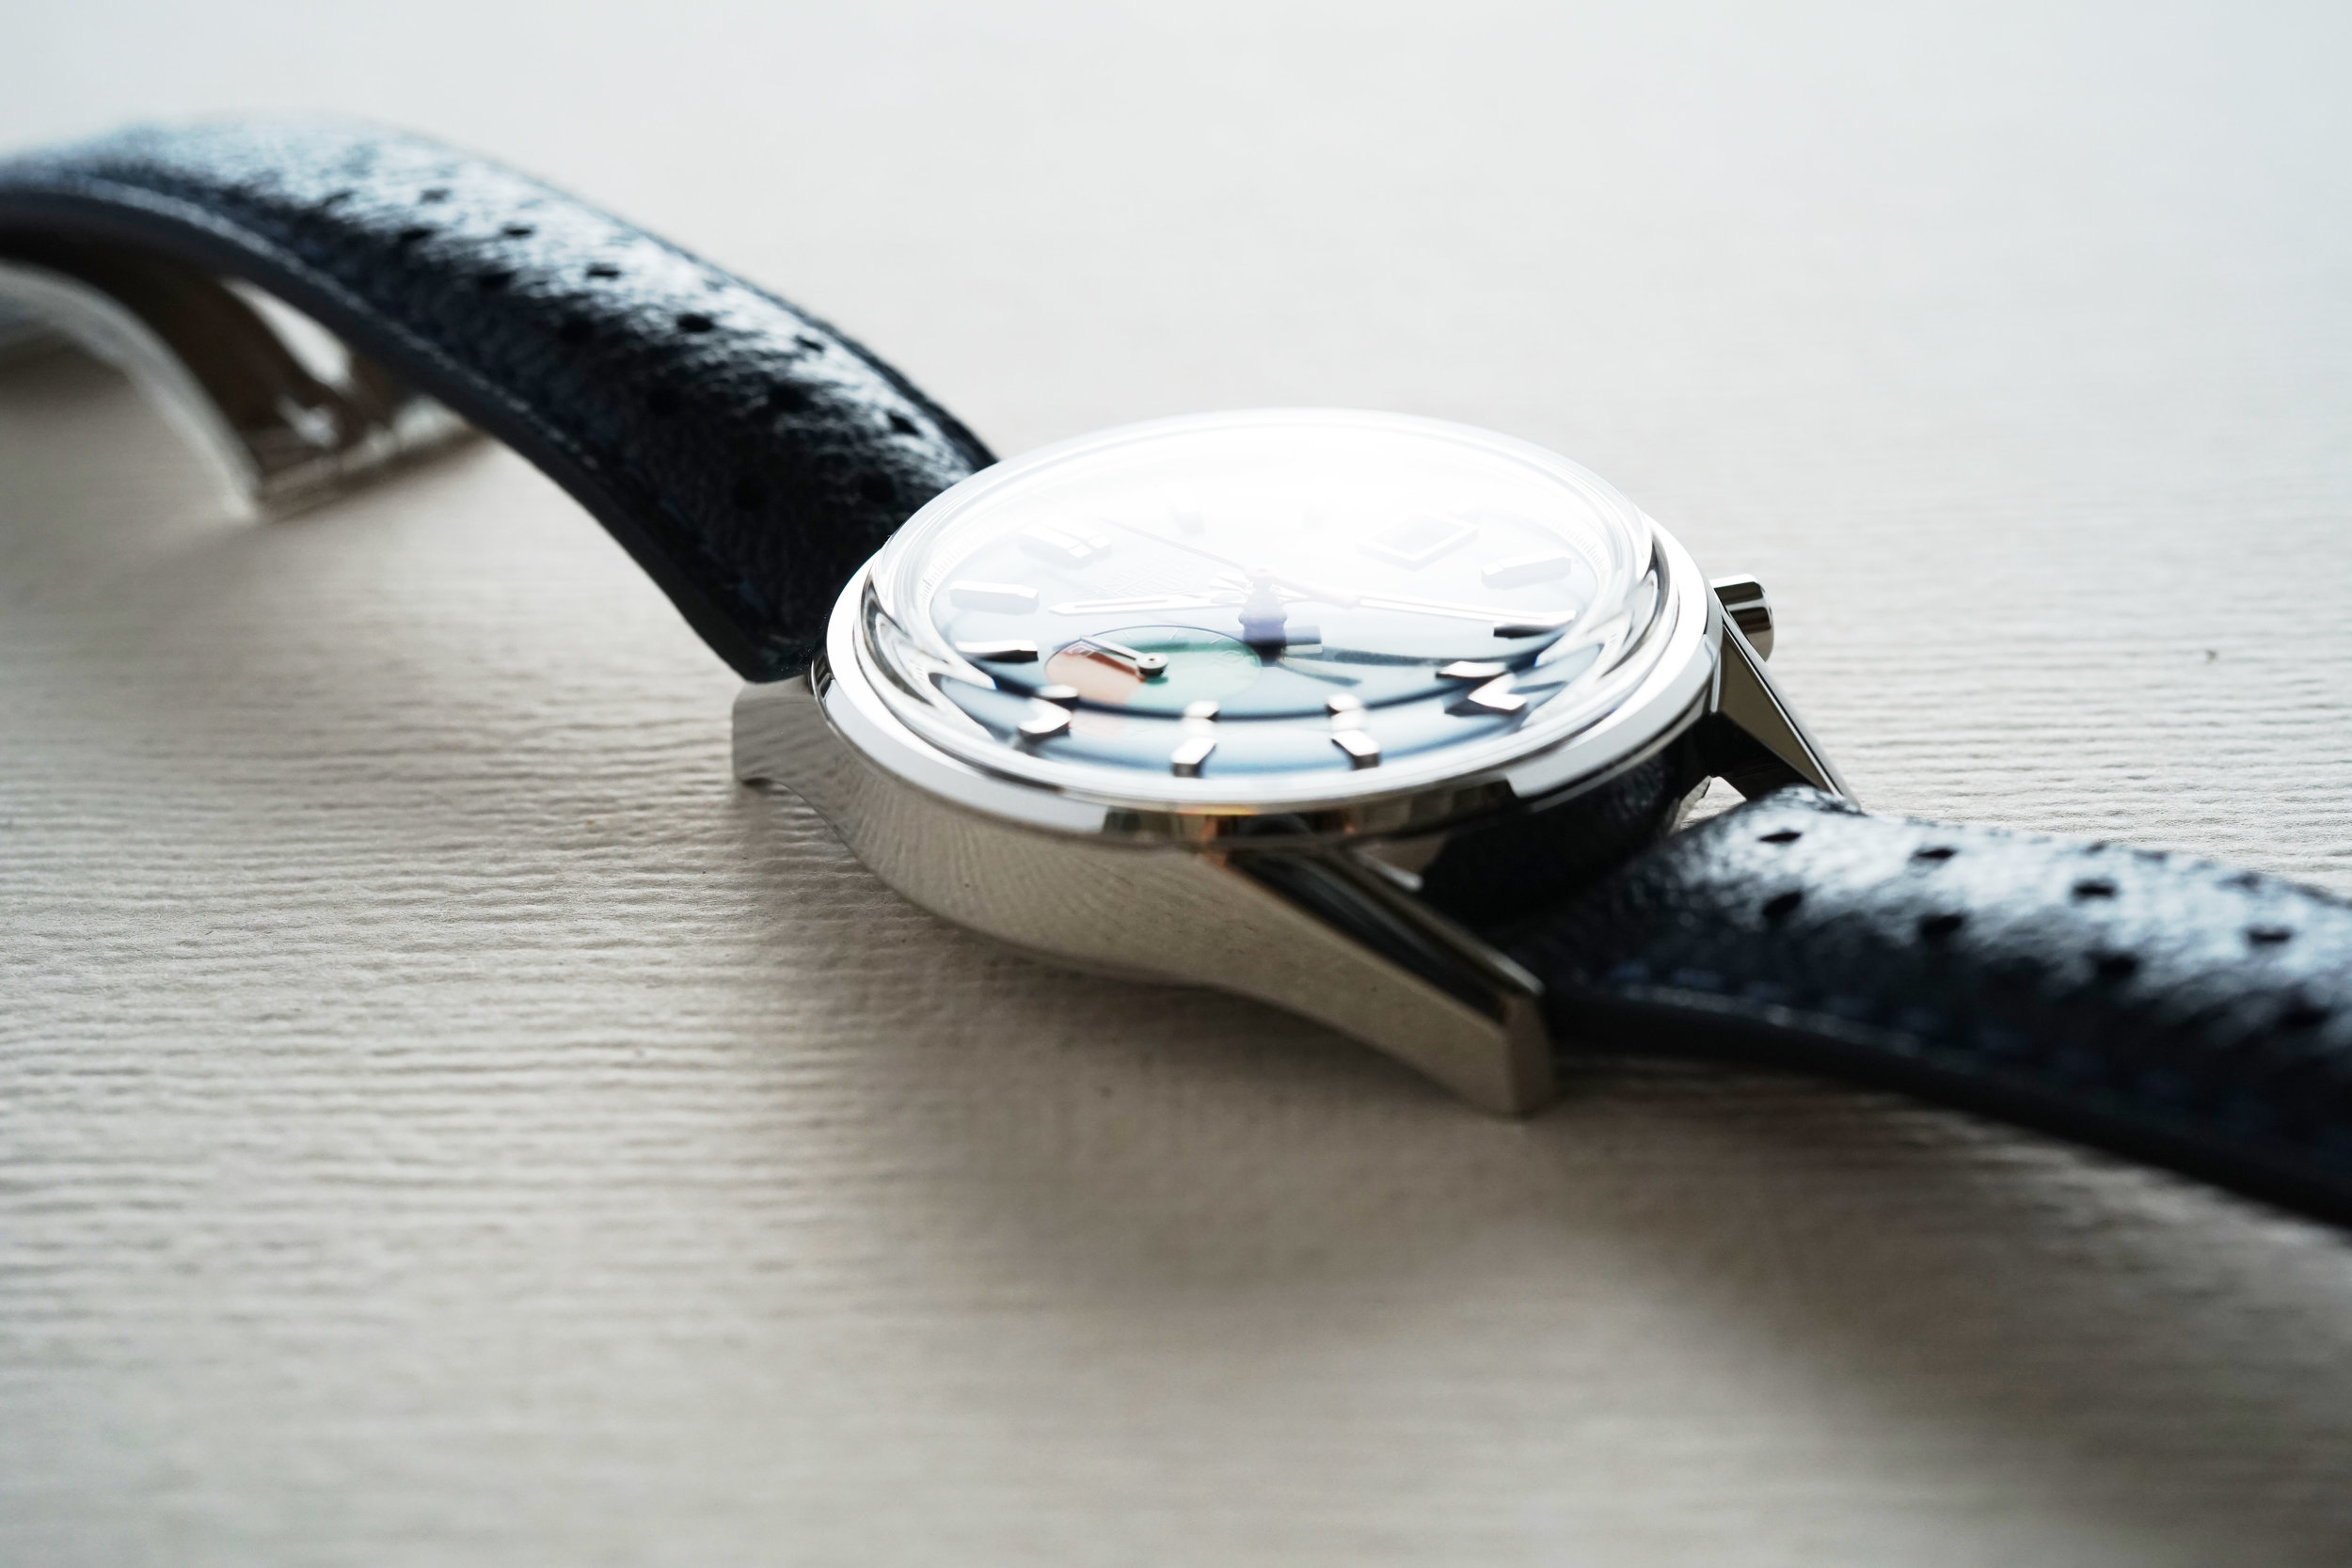 Tag Heuer Limited Edition Carrera Skipper for HODINKEE NOS — Lancy Aire